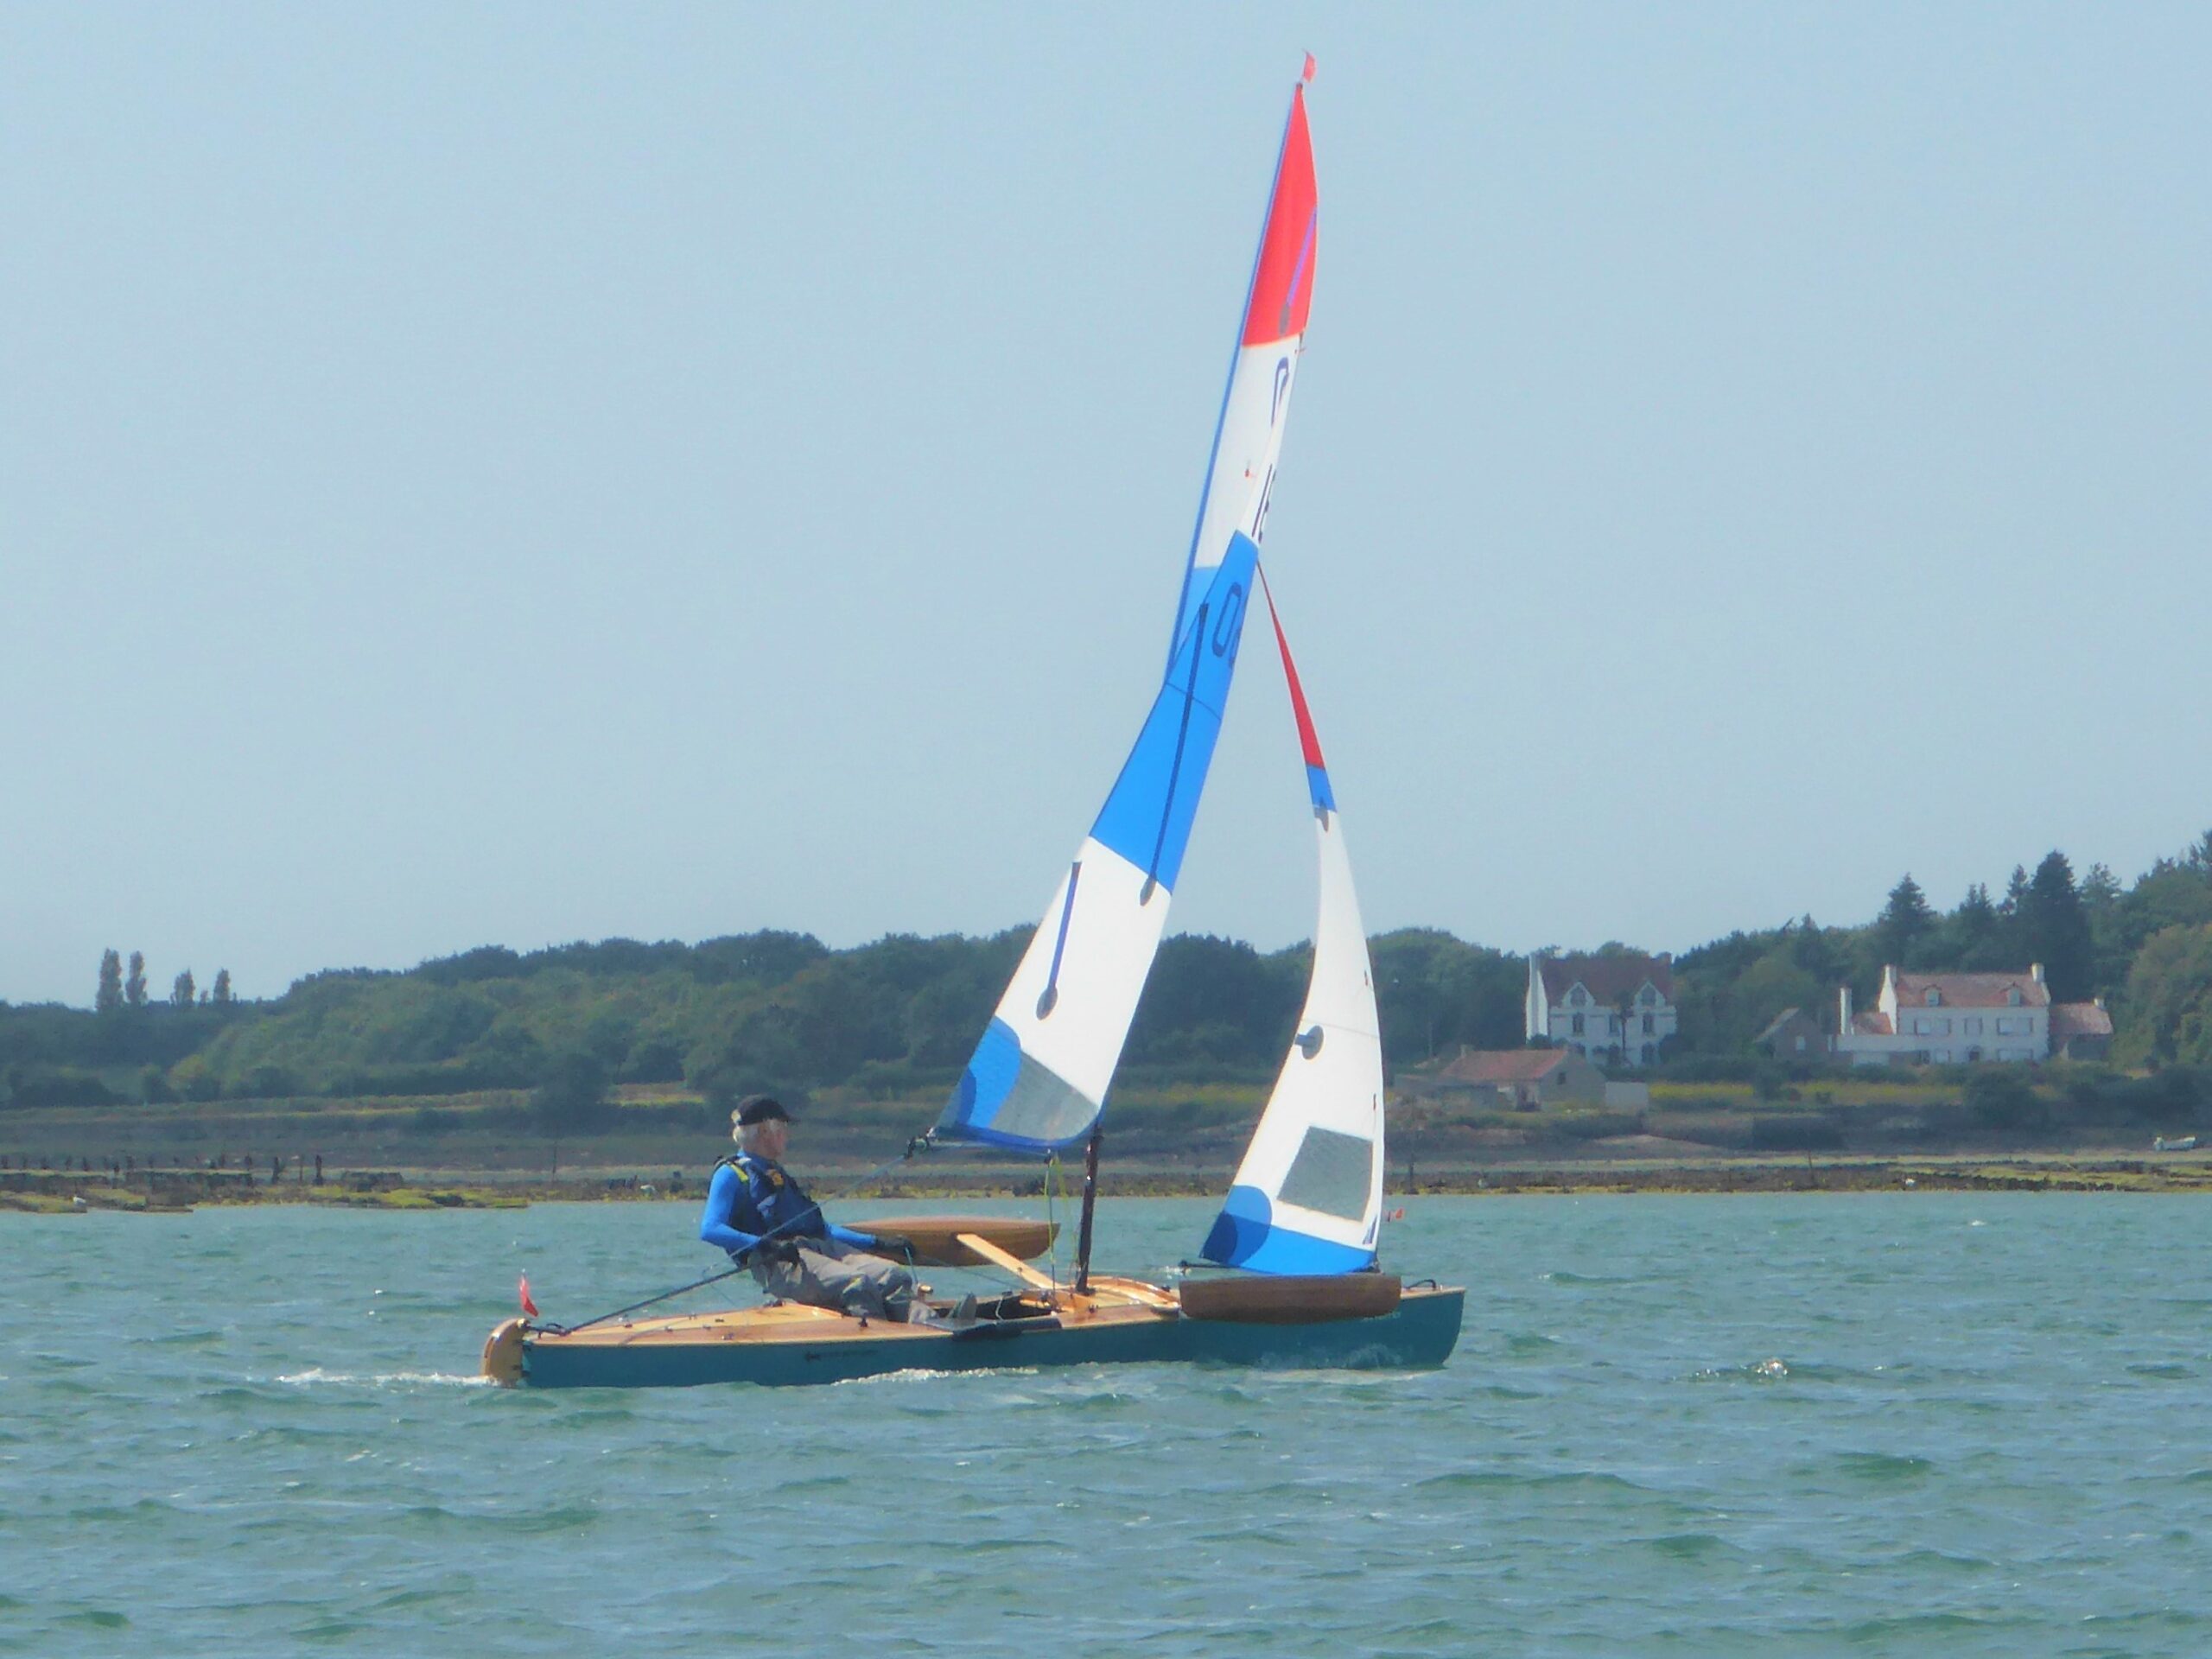 Decked sailing canoe with red, white and blue sails